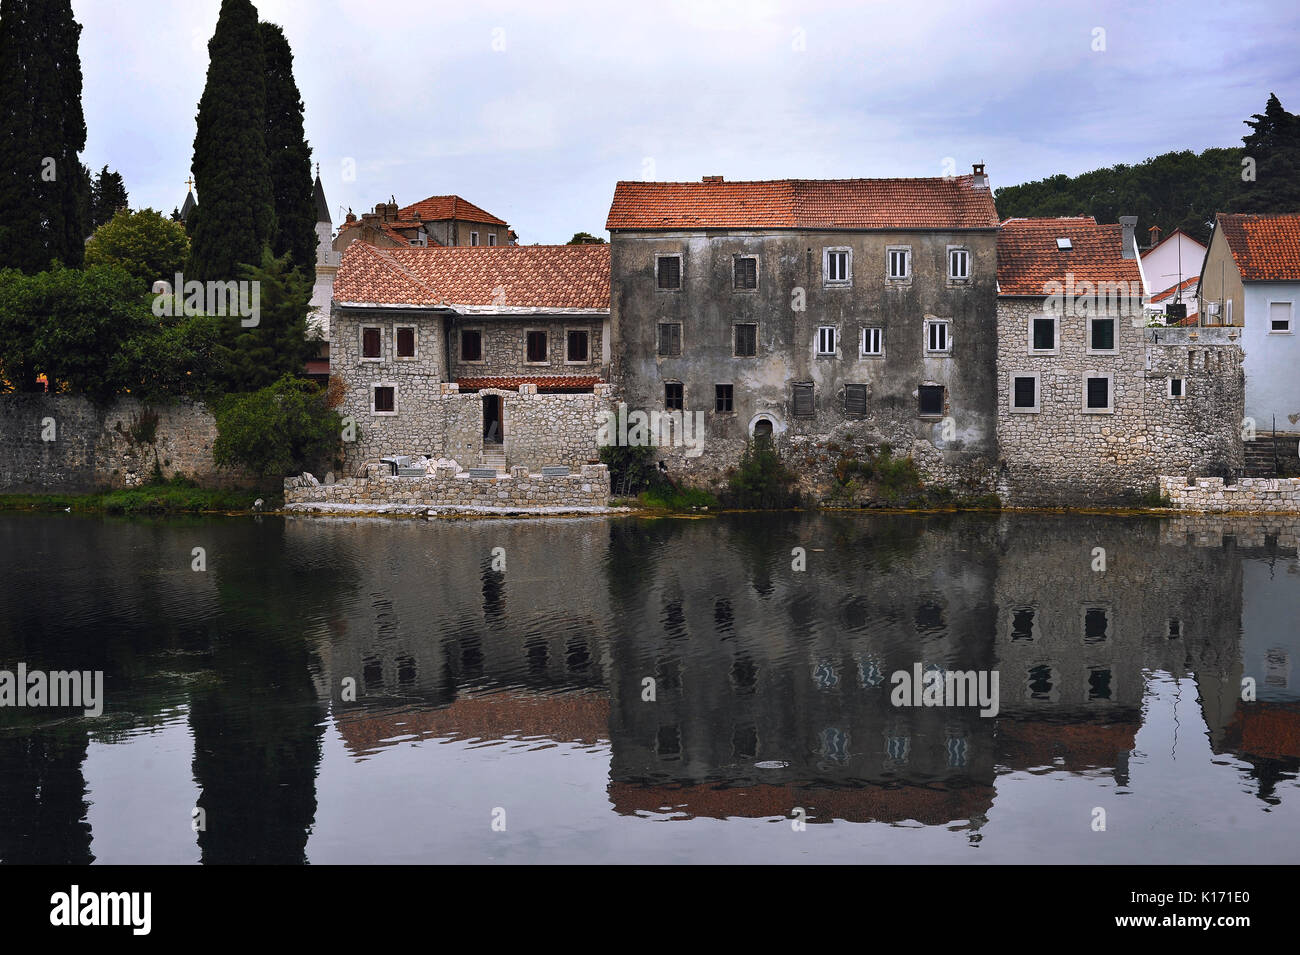 An old building on the Trebisnjica River. Stock Photo